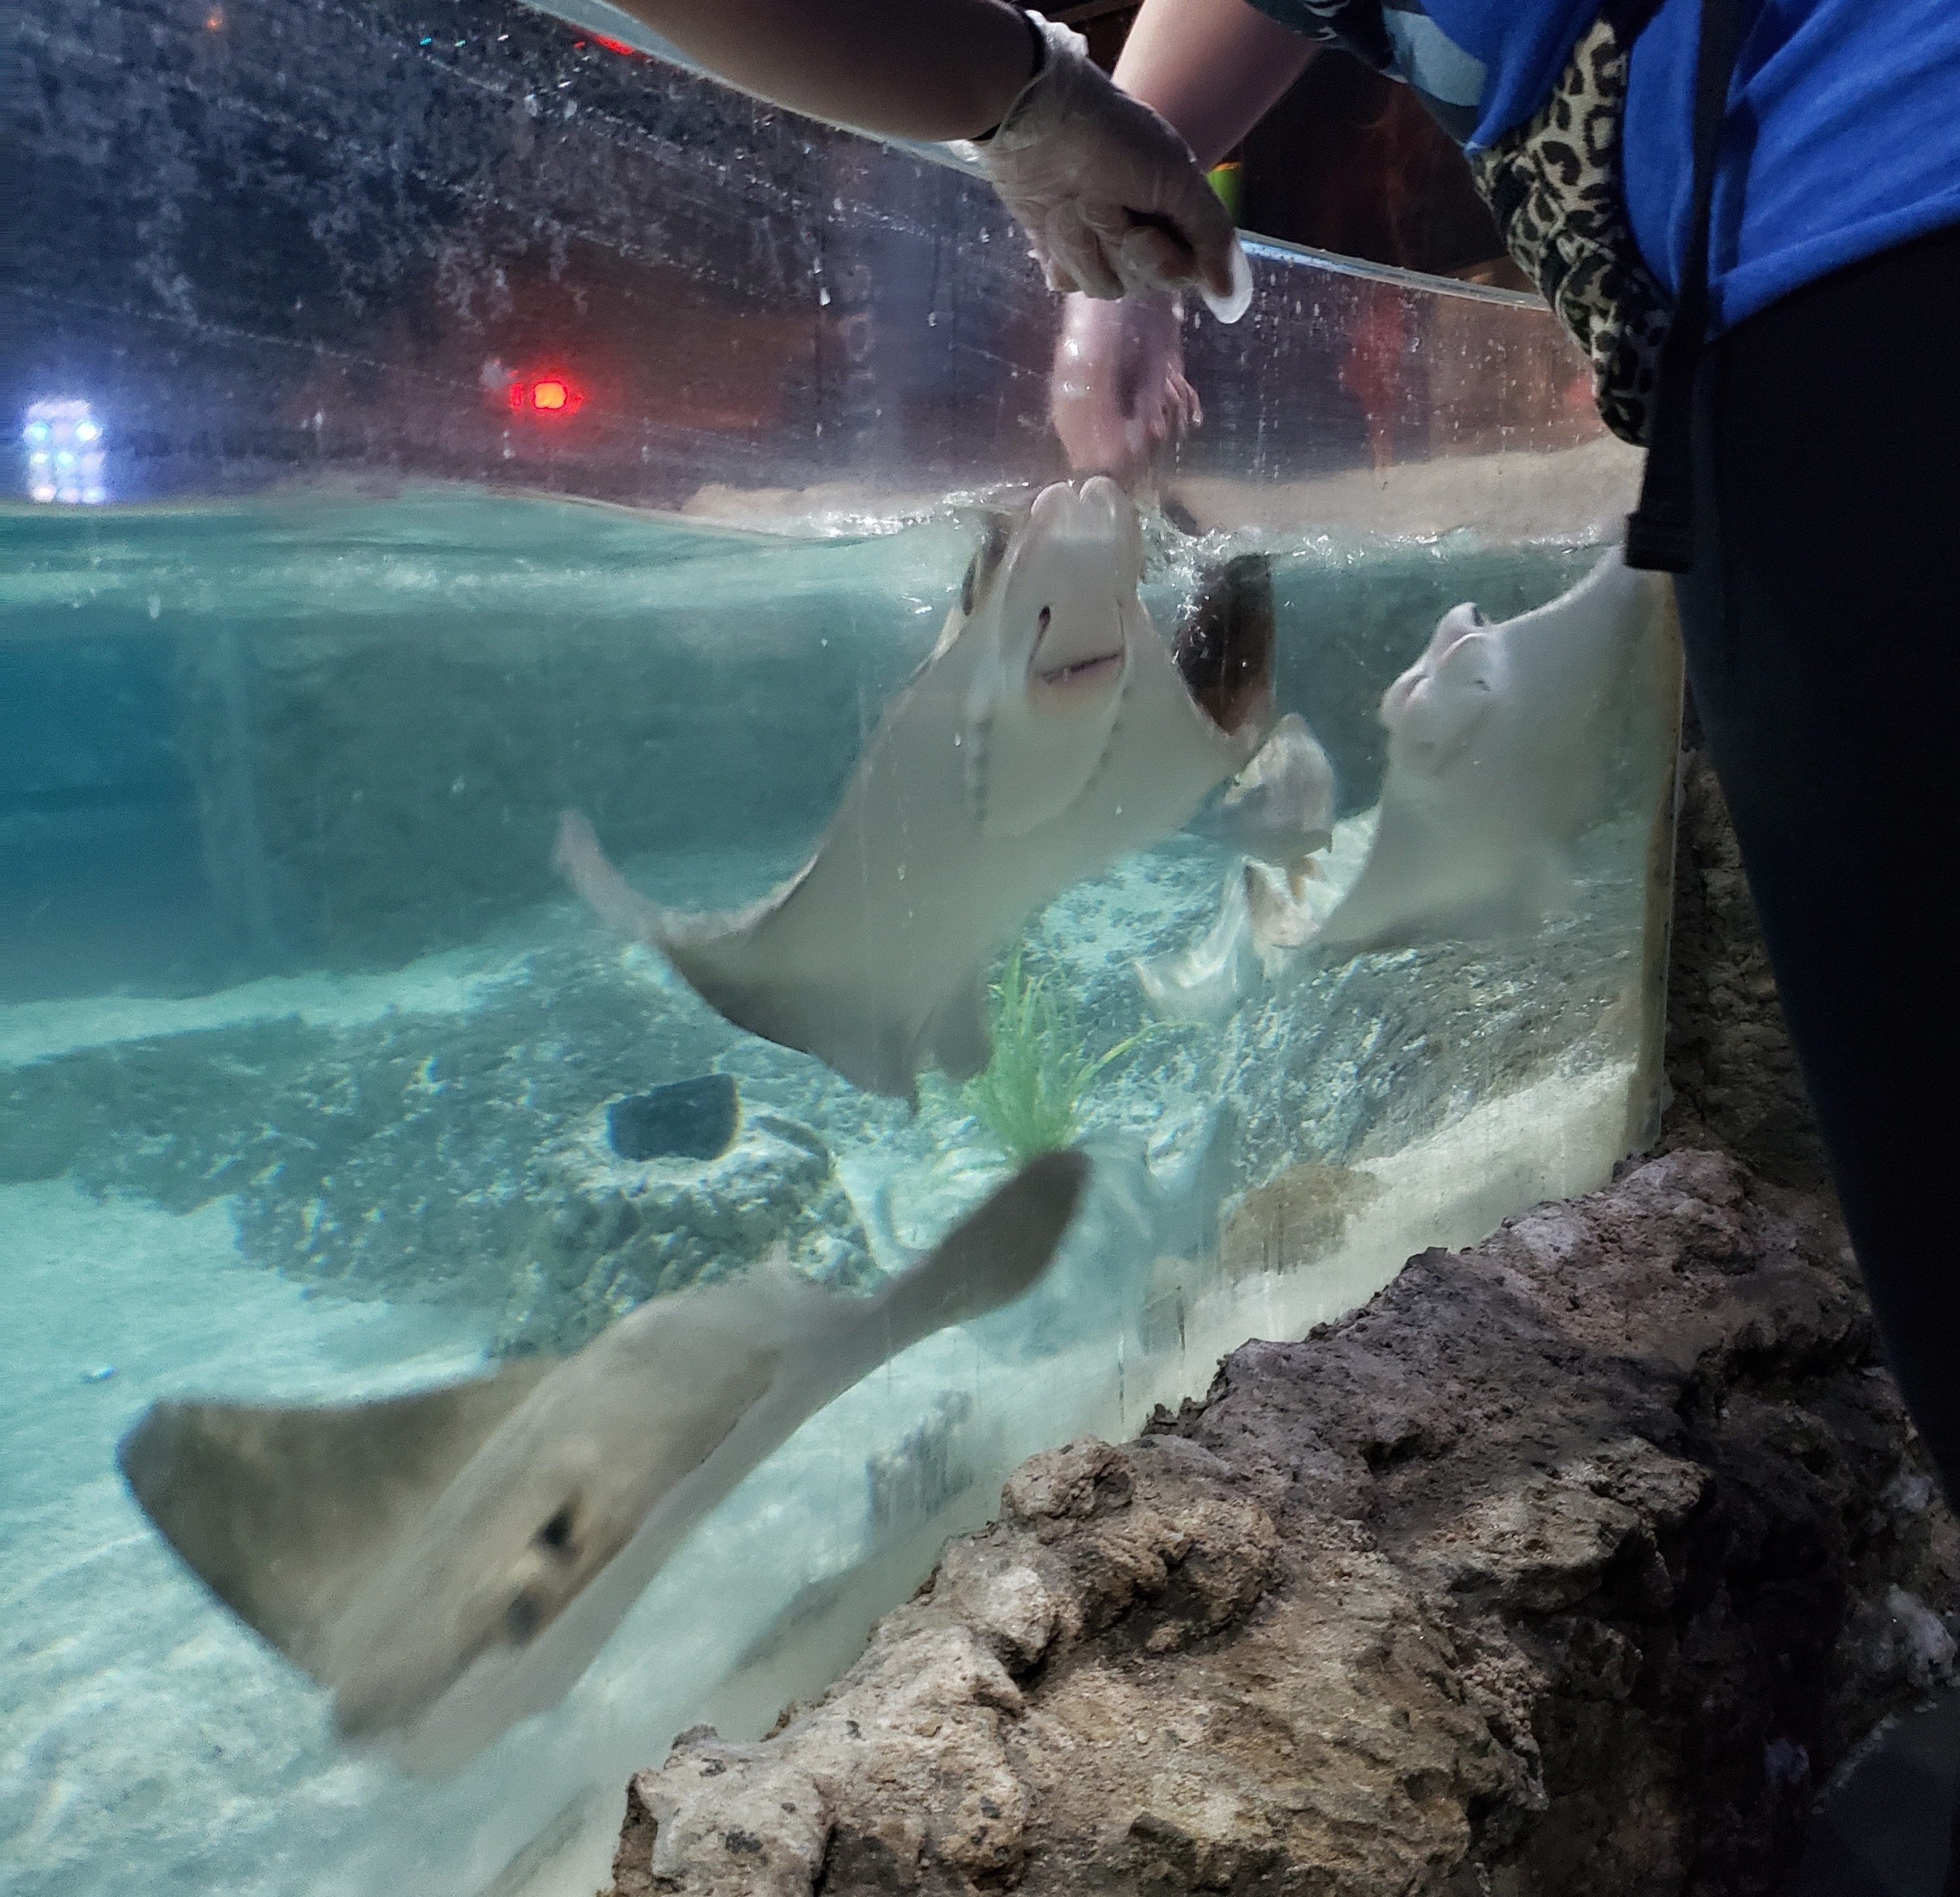 Stingrays in a tank being fed